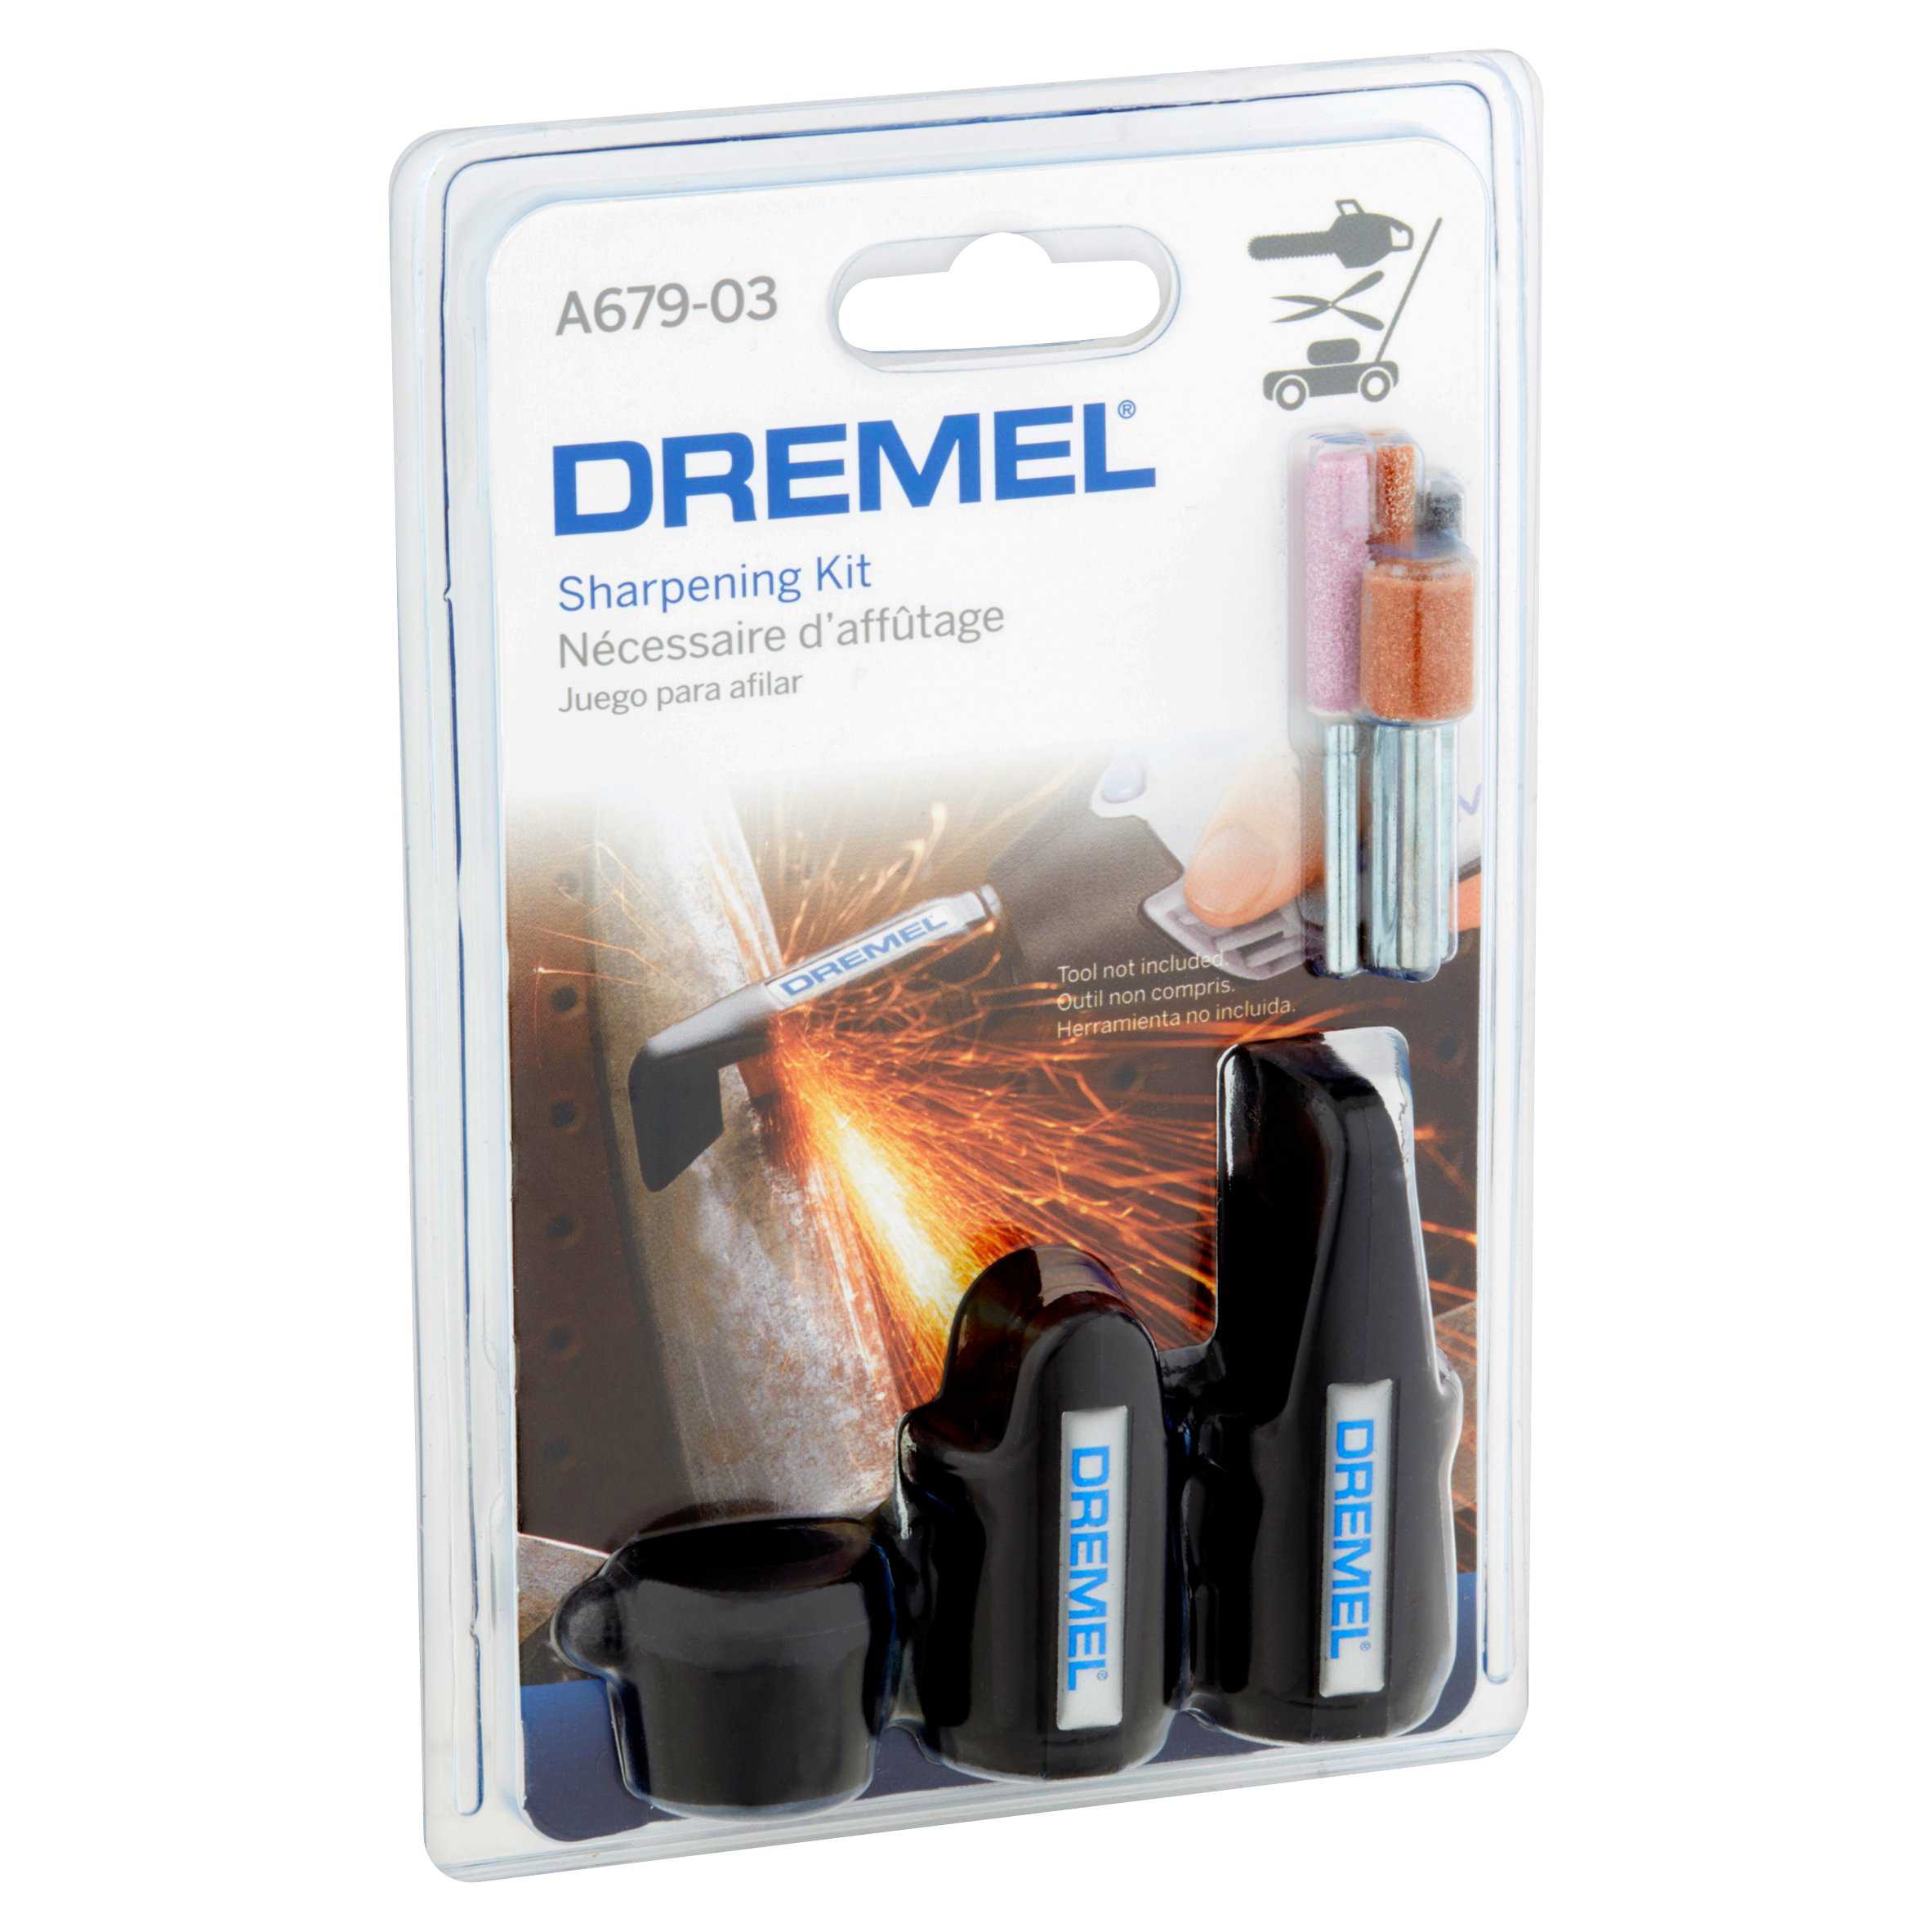 Dremel A679-03 Rotary Tool Sharpening Kit with 3 Attachments and 4 Accessories